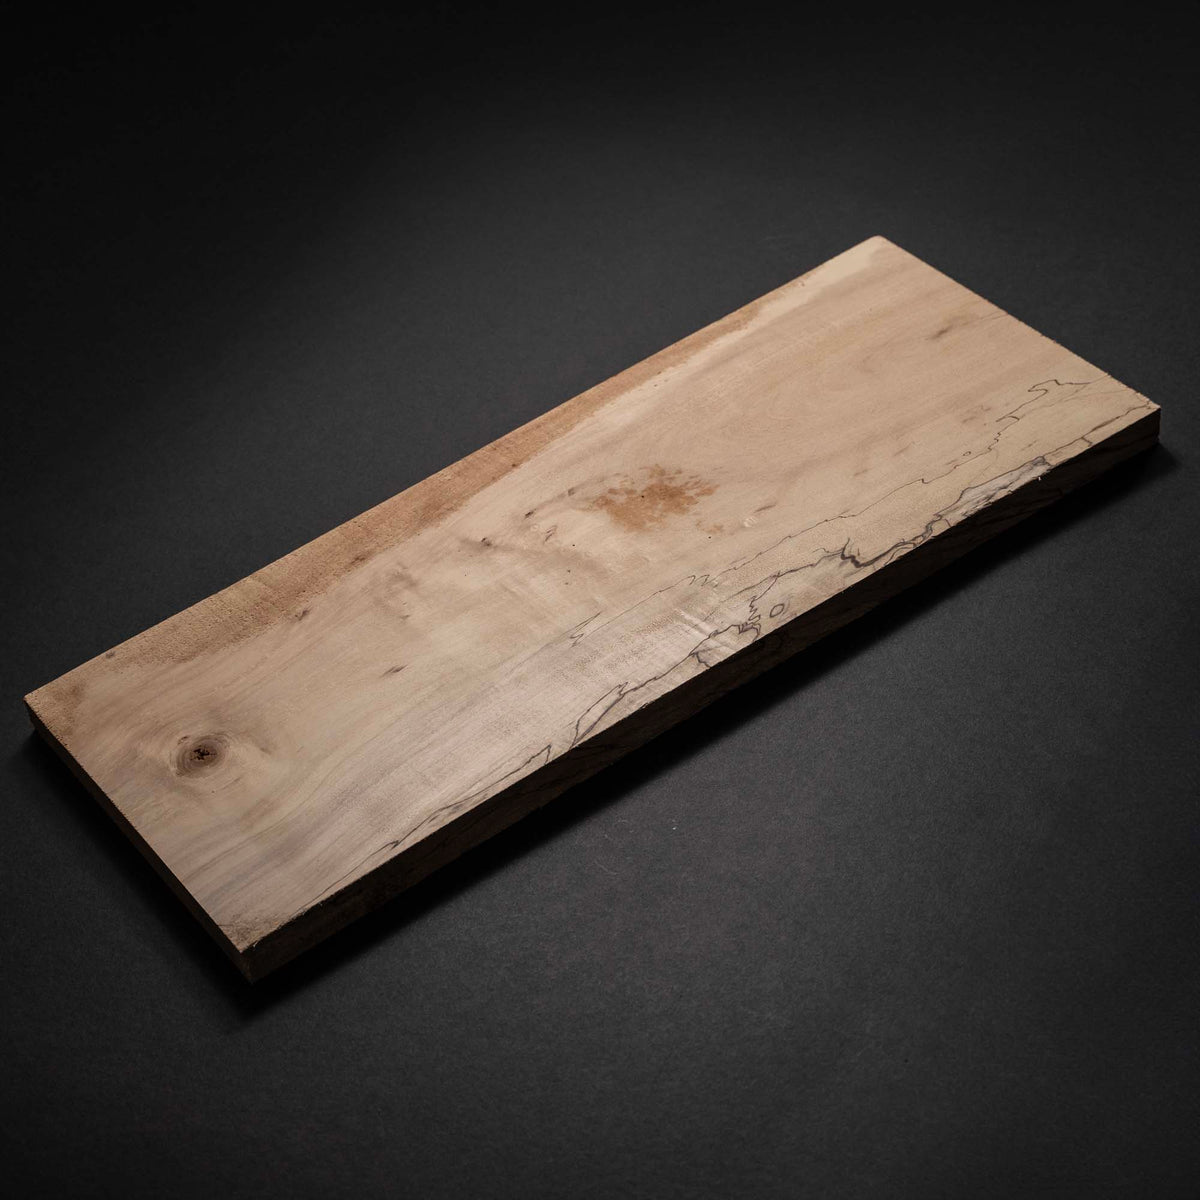 4/4 1” Spalted Wide Hard Maple Wood Boards - Kiln Dried - Dimensional Lumber - Cut To Size Boards - Perfect for Floating shelf shelves